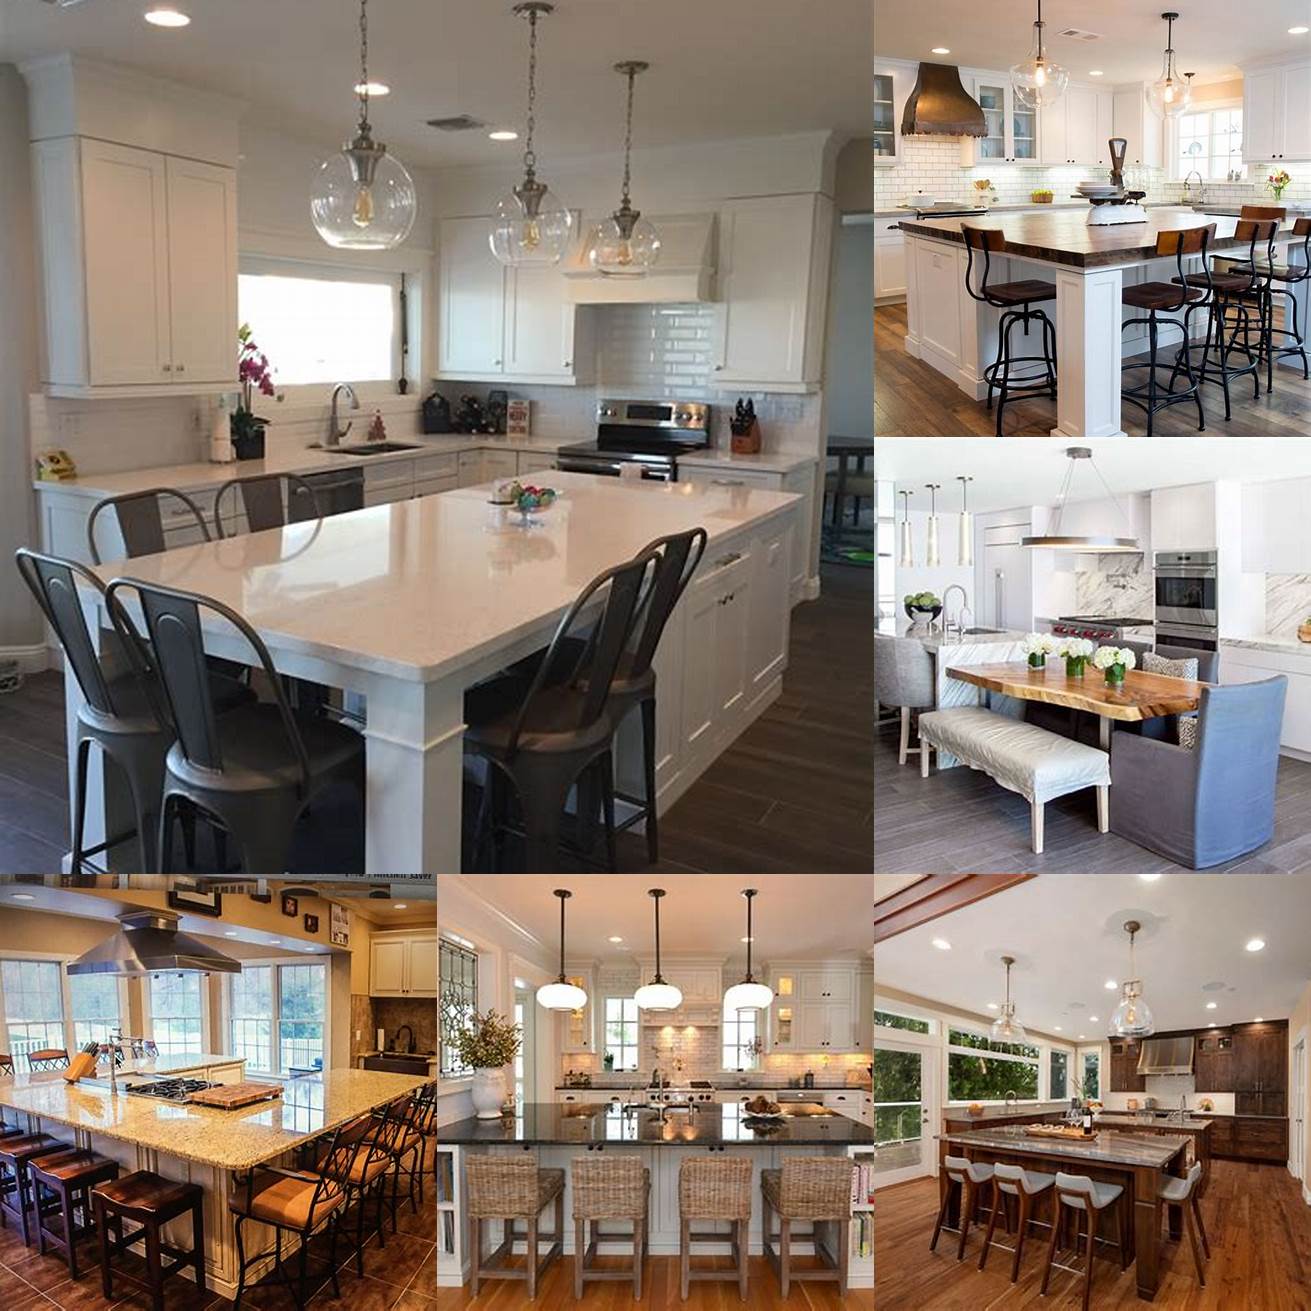 A multi-level kitchen island with a dining table and storage